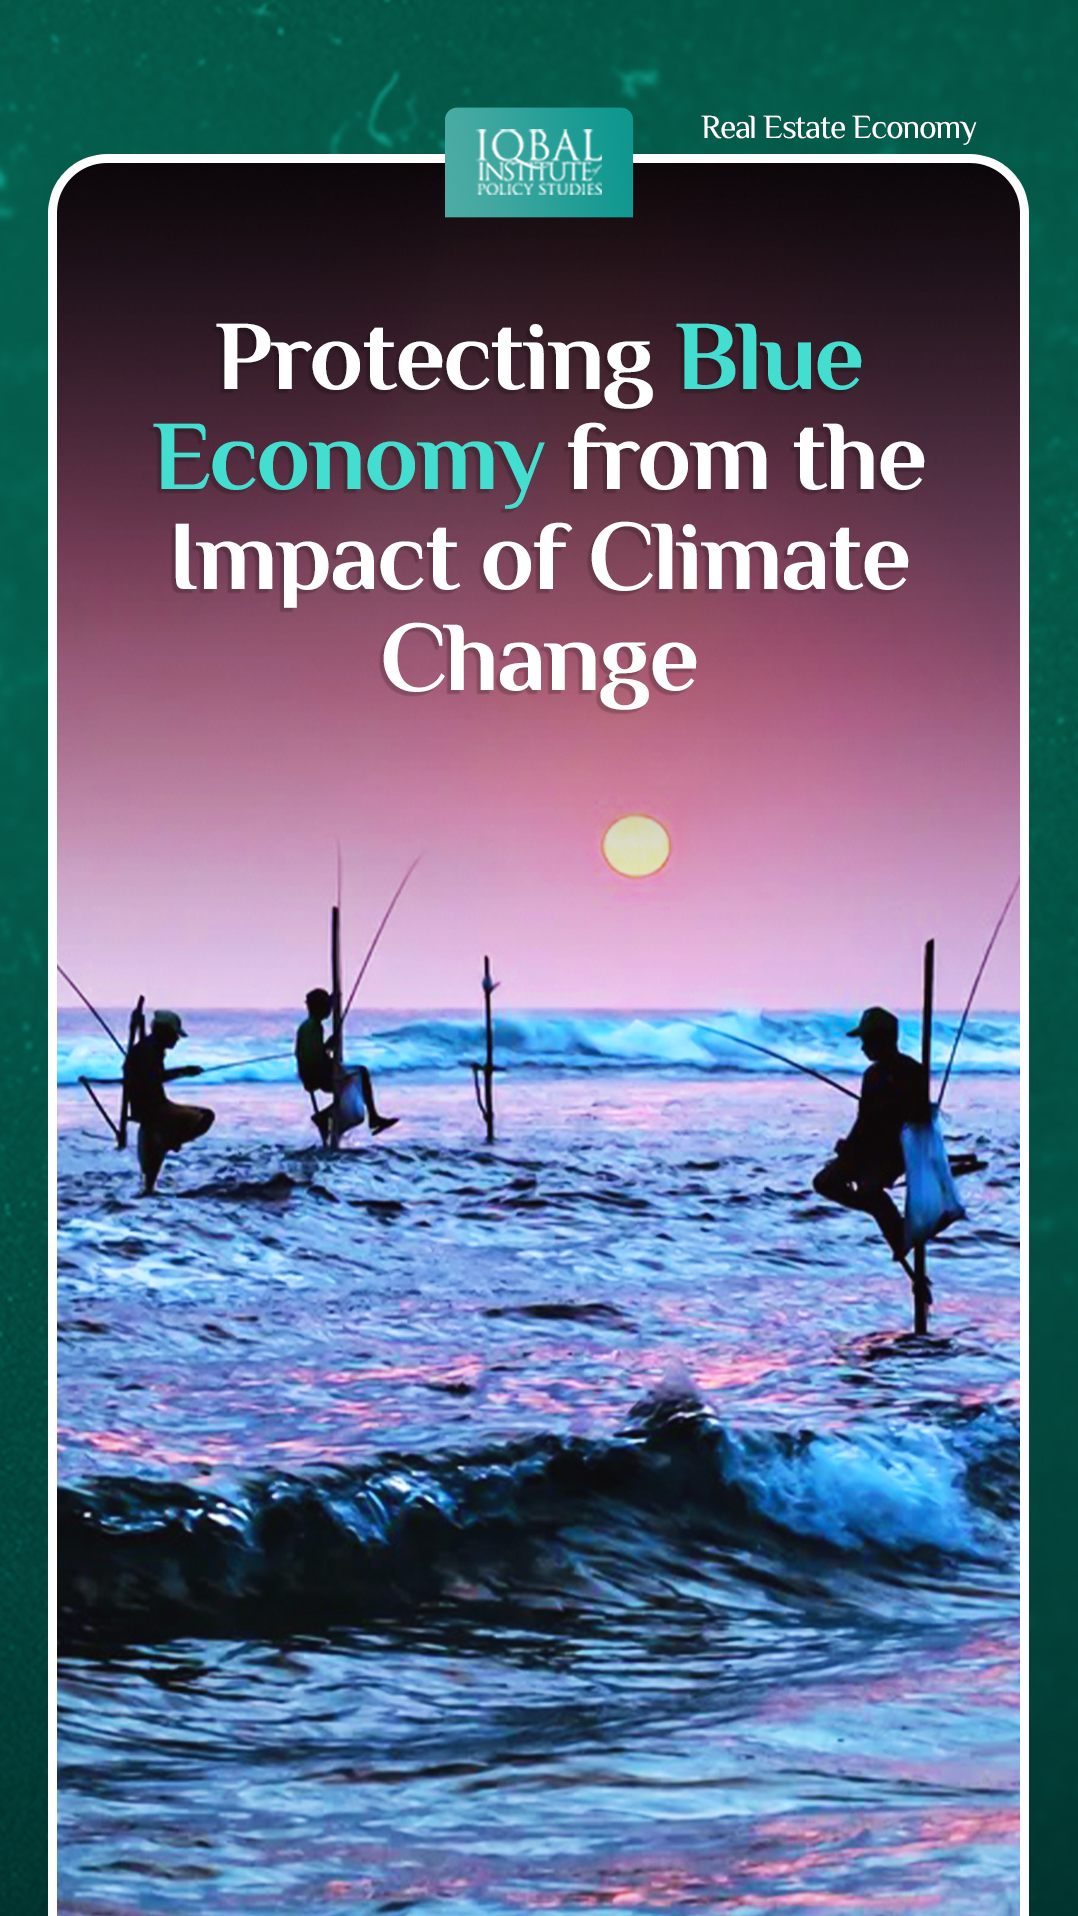 Protecting Blue Economy from the Impact of Climate Change